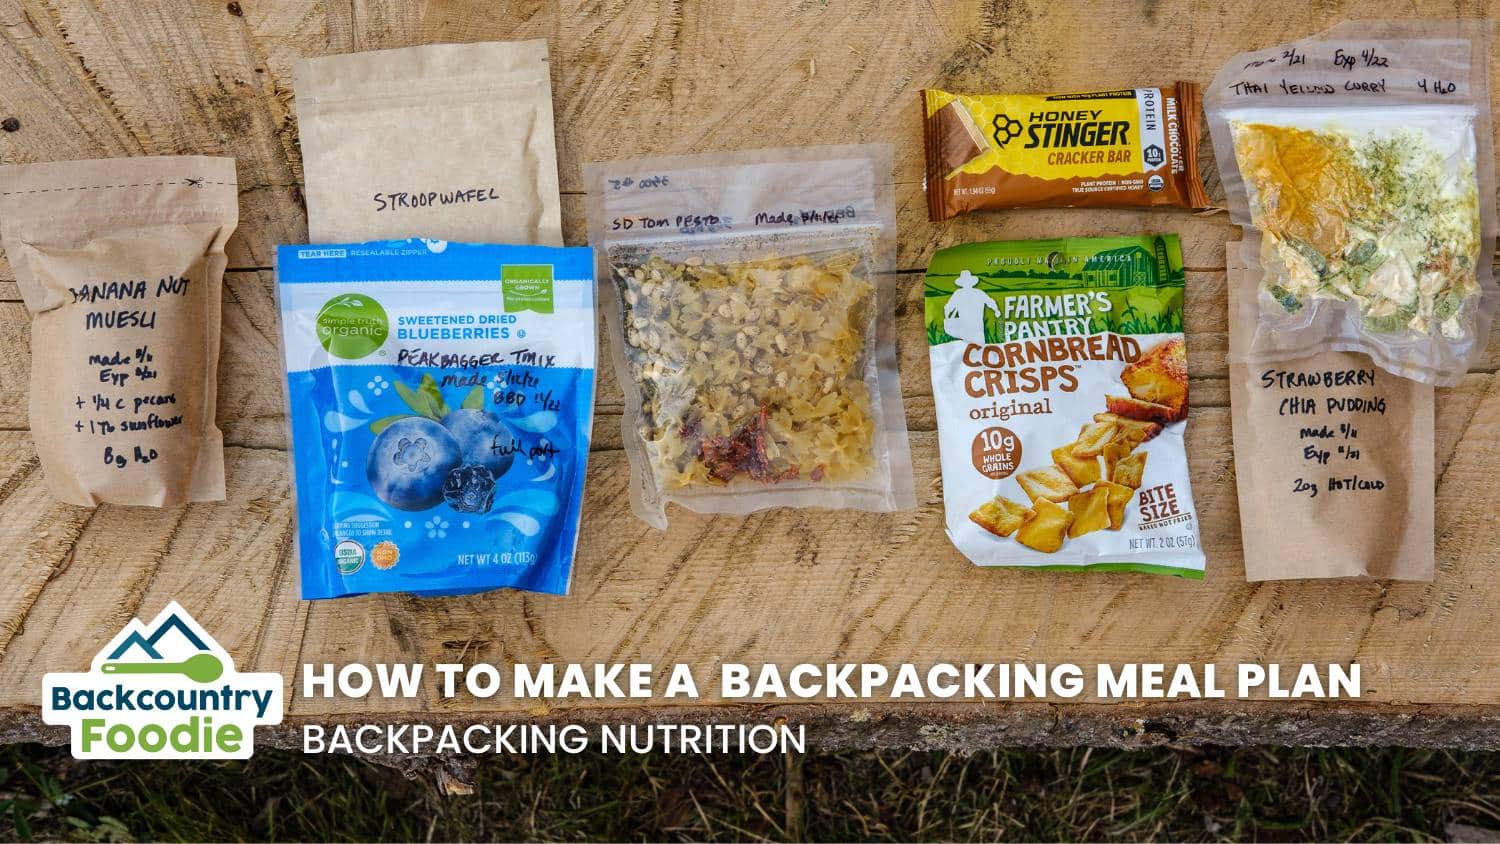 Backcountry Foodie Blog How to Create Quick and Easy Backpacking Meal Plans Backpacking Nutrition thumbnail